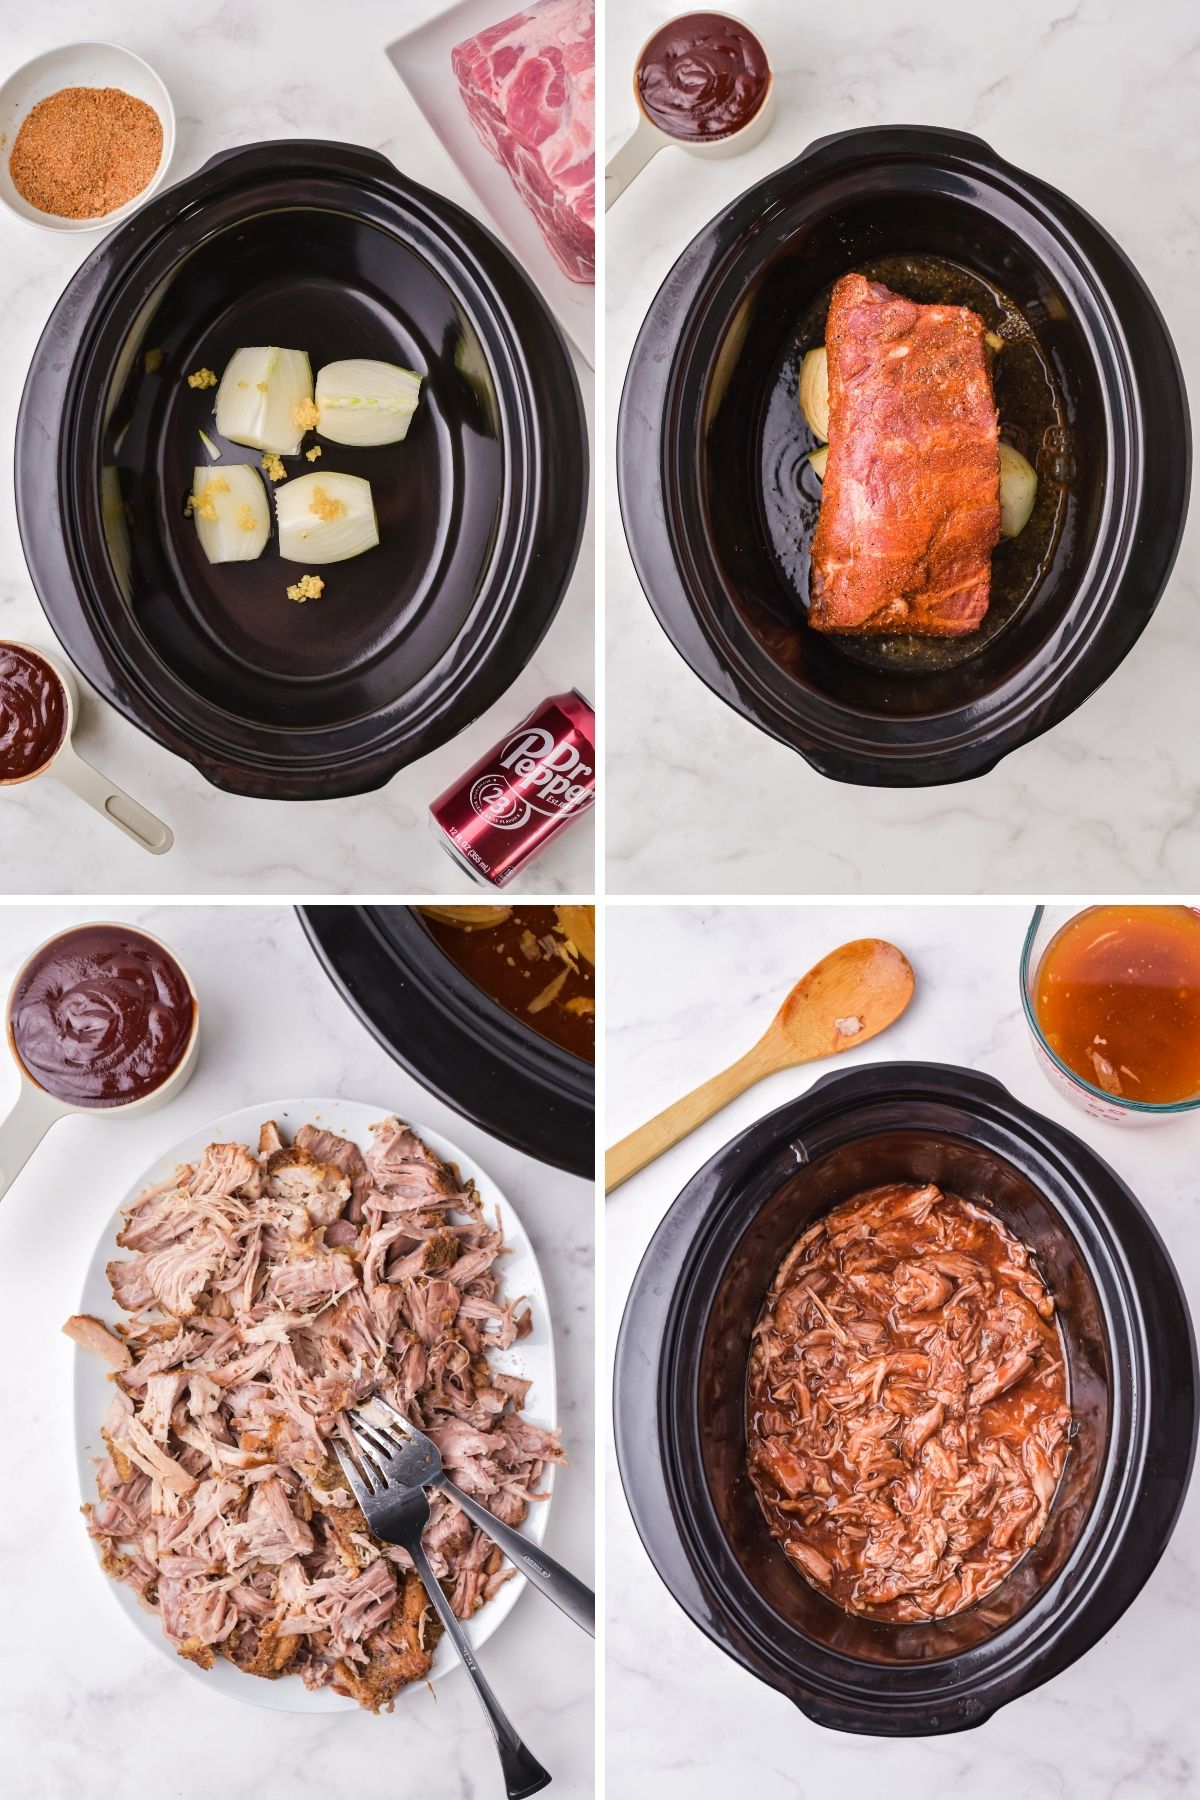 looking top down into crockpot: onions in bottom of crockpot; pork loin on top with seasonings rubbed in; pork on plate with two forks shredded; shredded pork back in crockpot with BBQ